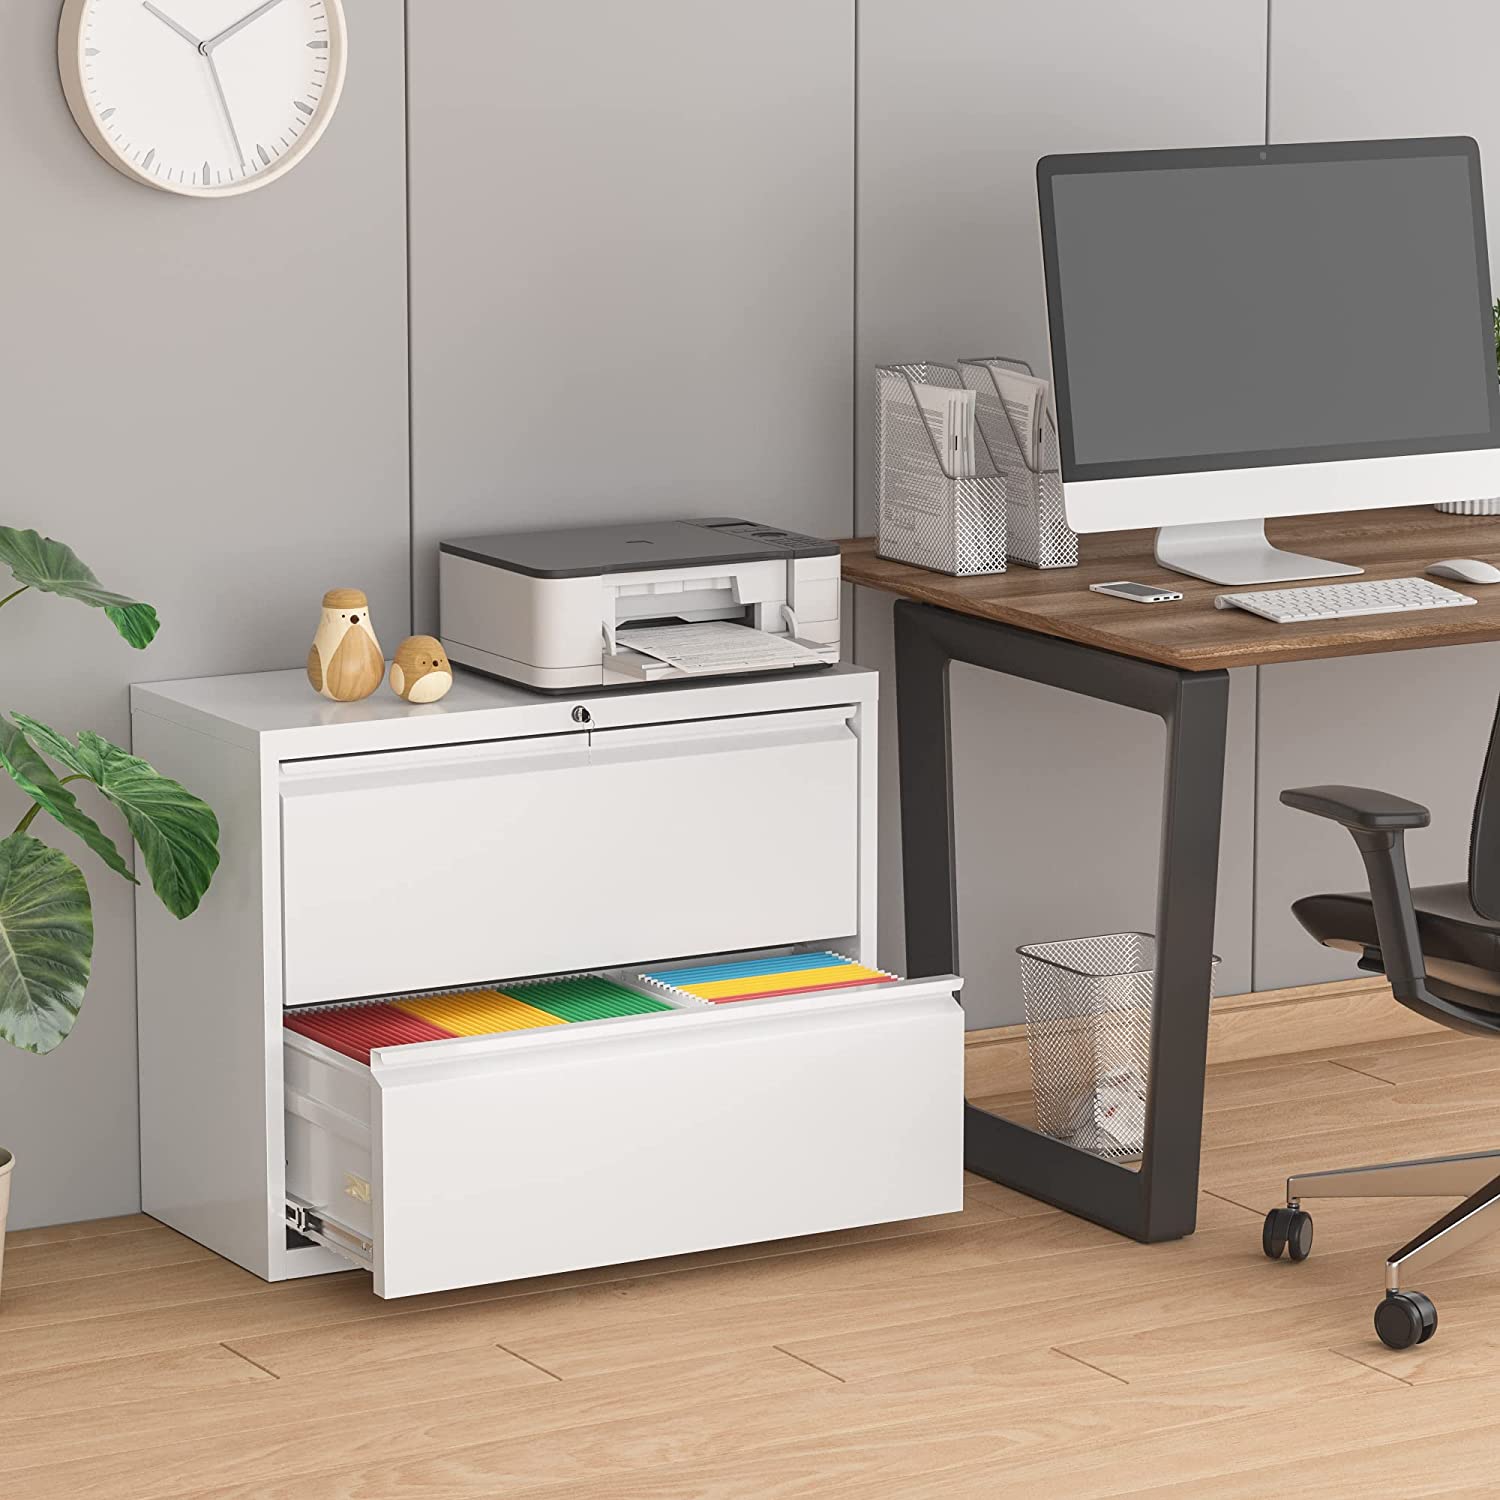 THE 10 BEST Lateral Filing Cabinets for 2023